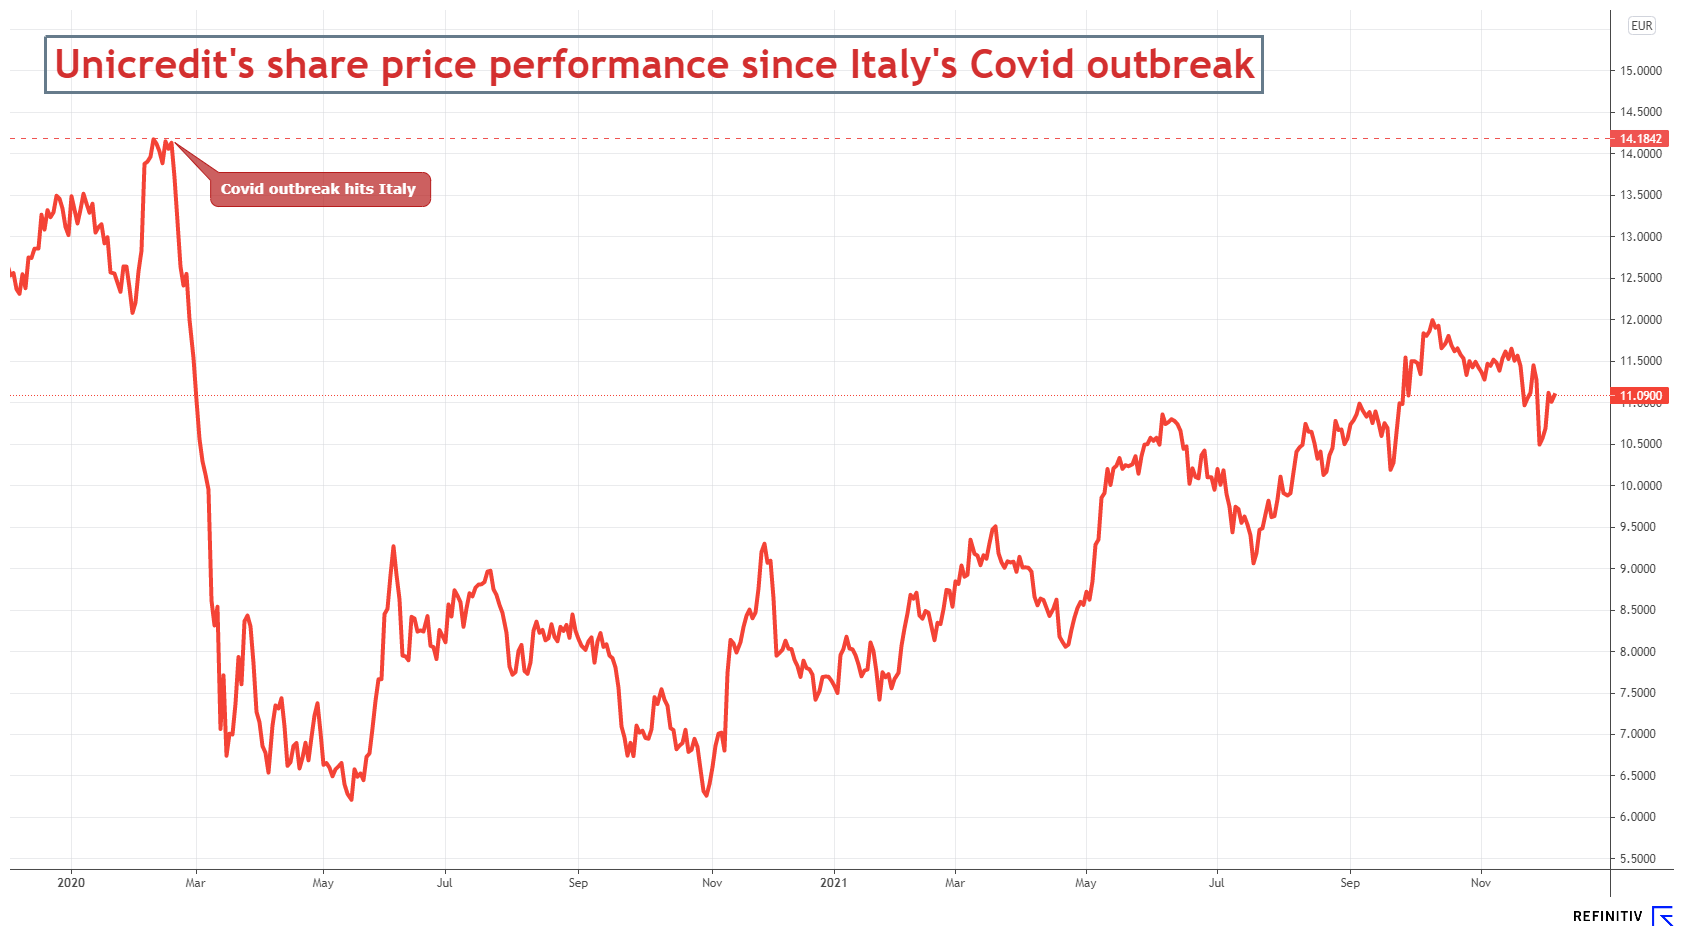 UniCredit shares are below pre-Covid levels